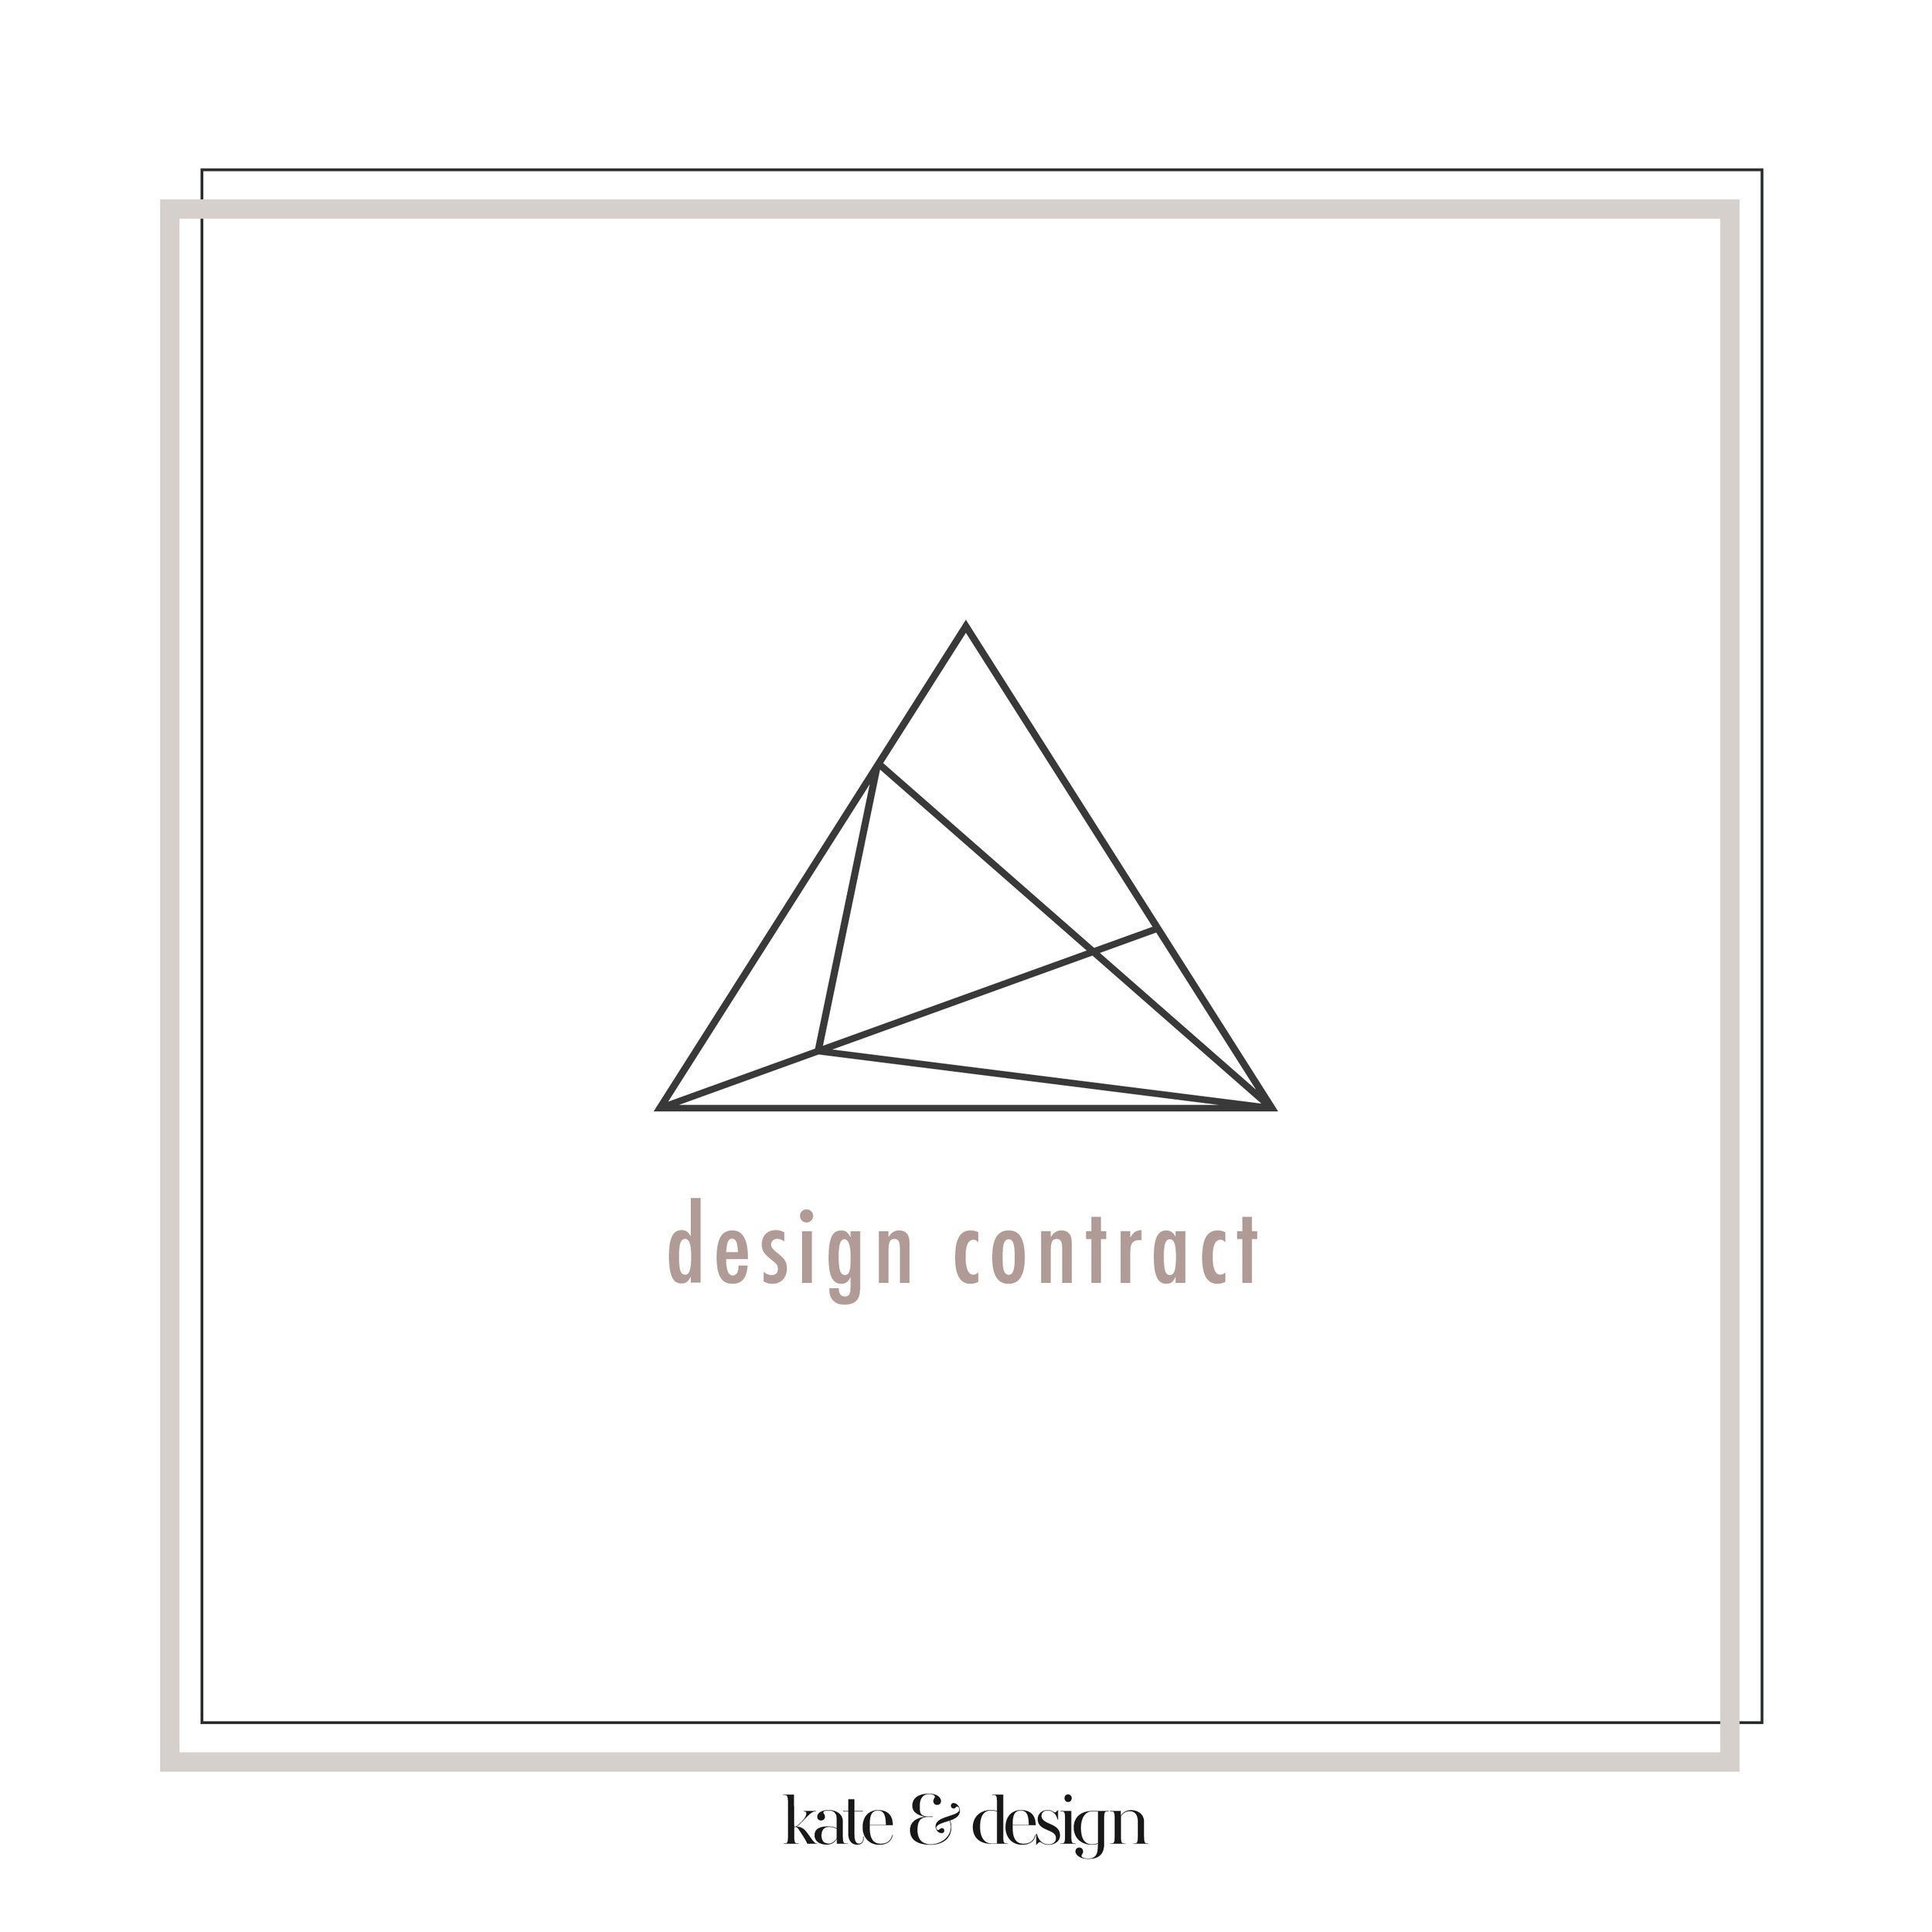 Copy of Copy of design contract